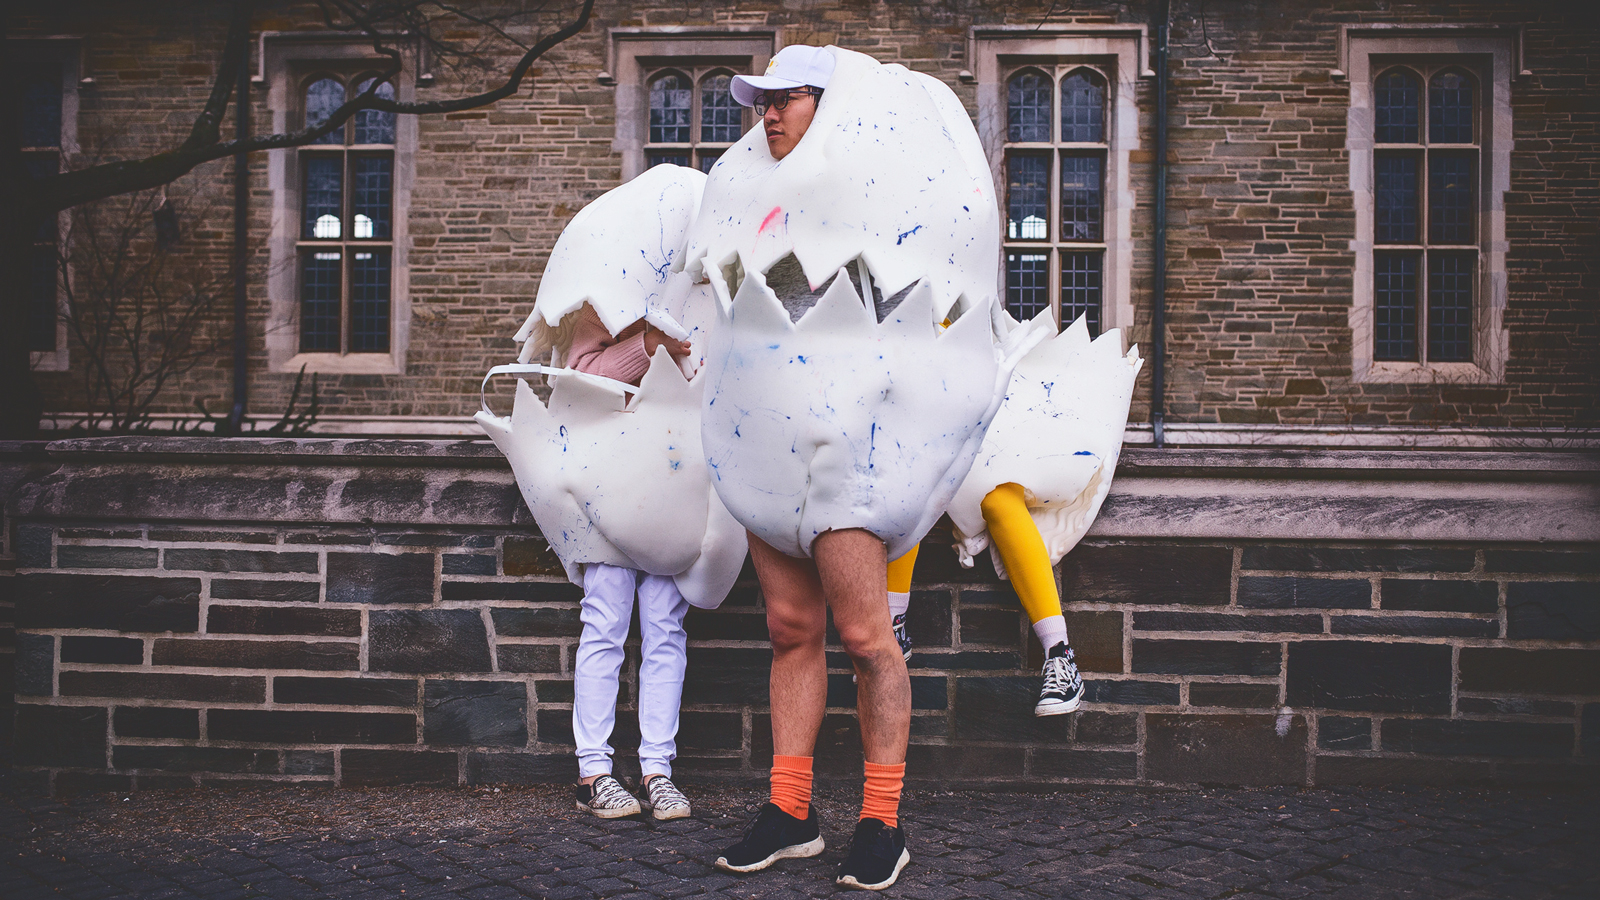 Costumed participants, dressed as eggs, watch the 2016 parade